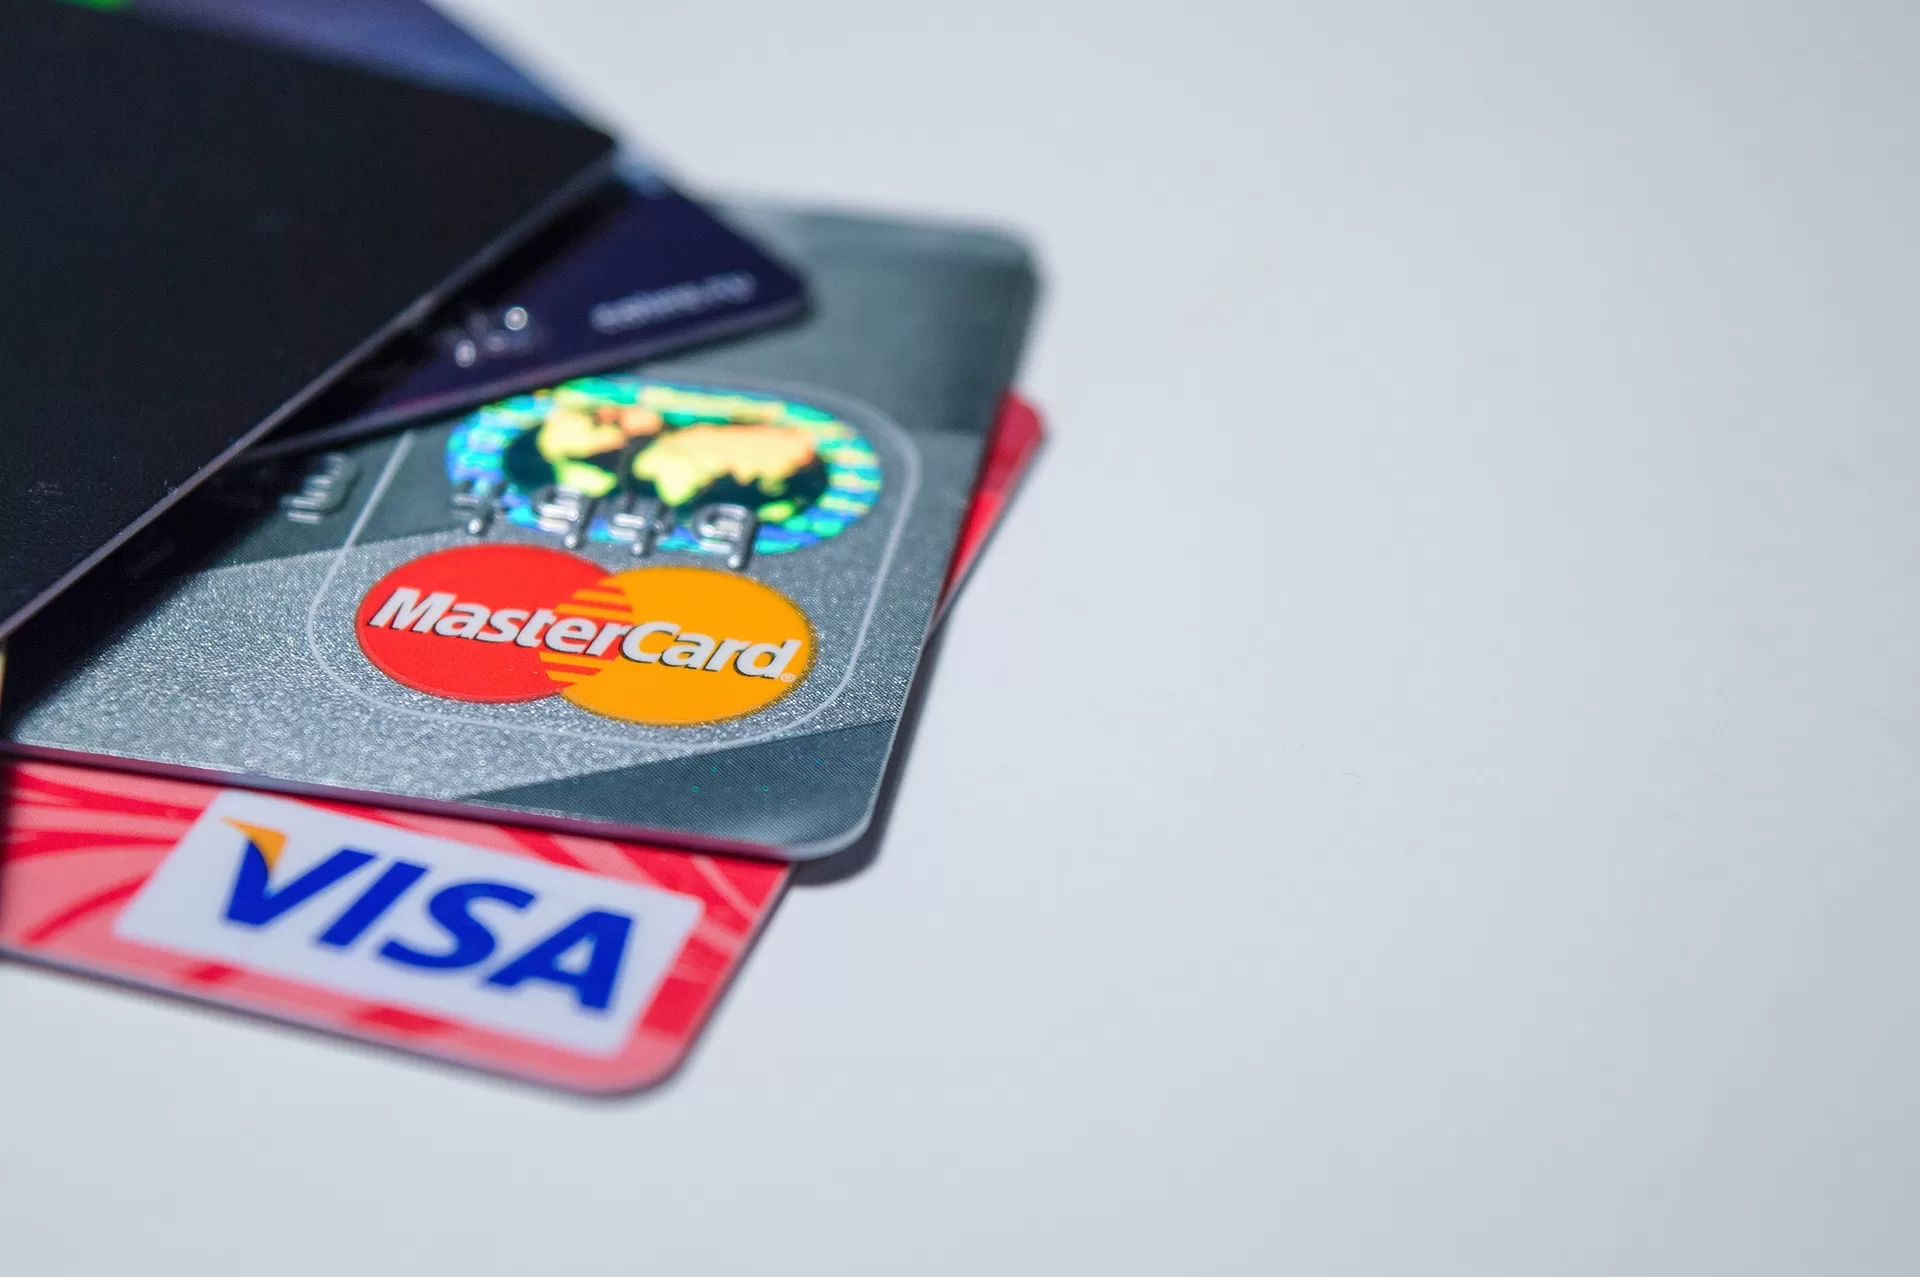 Shopping For The Best Credit Cards